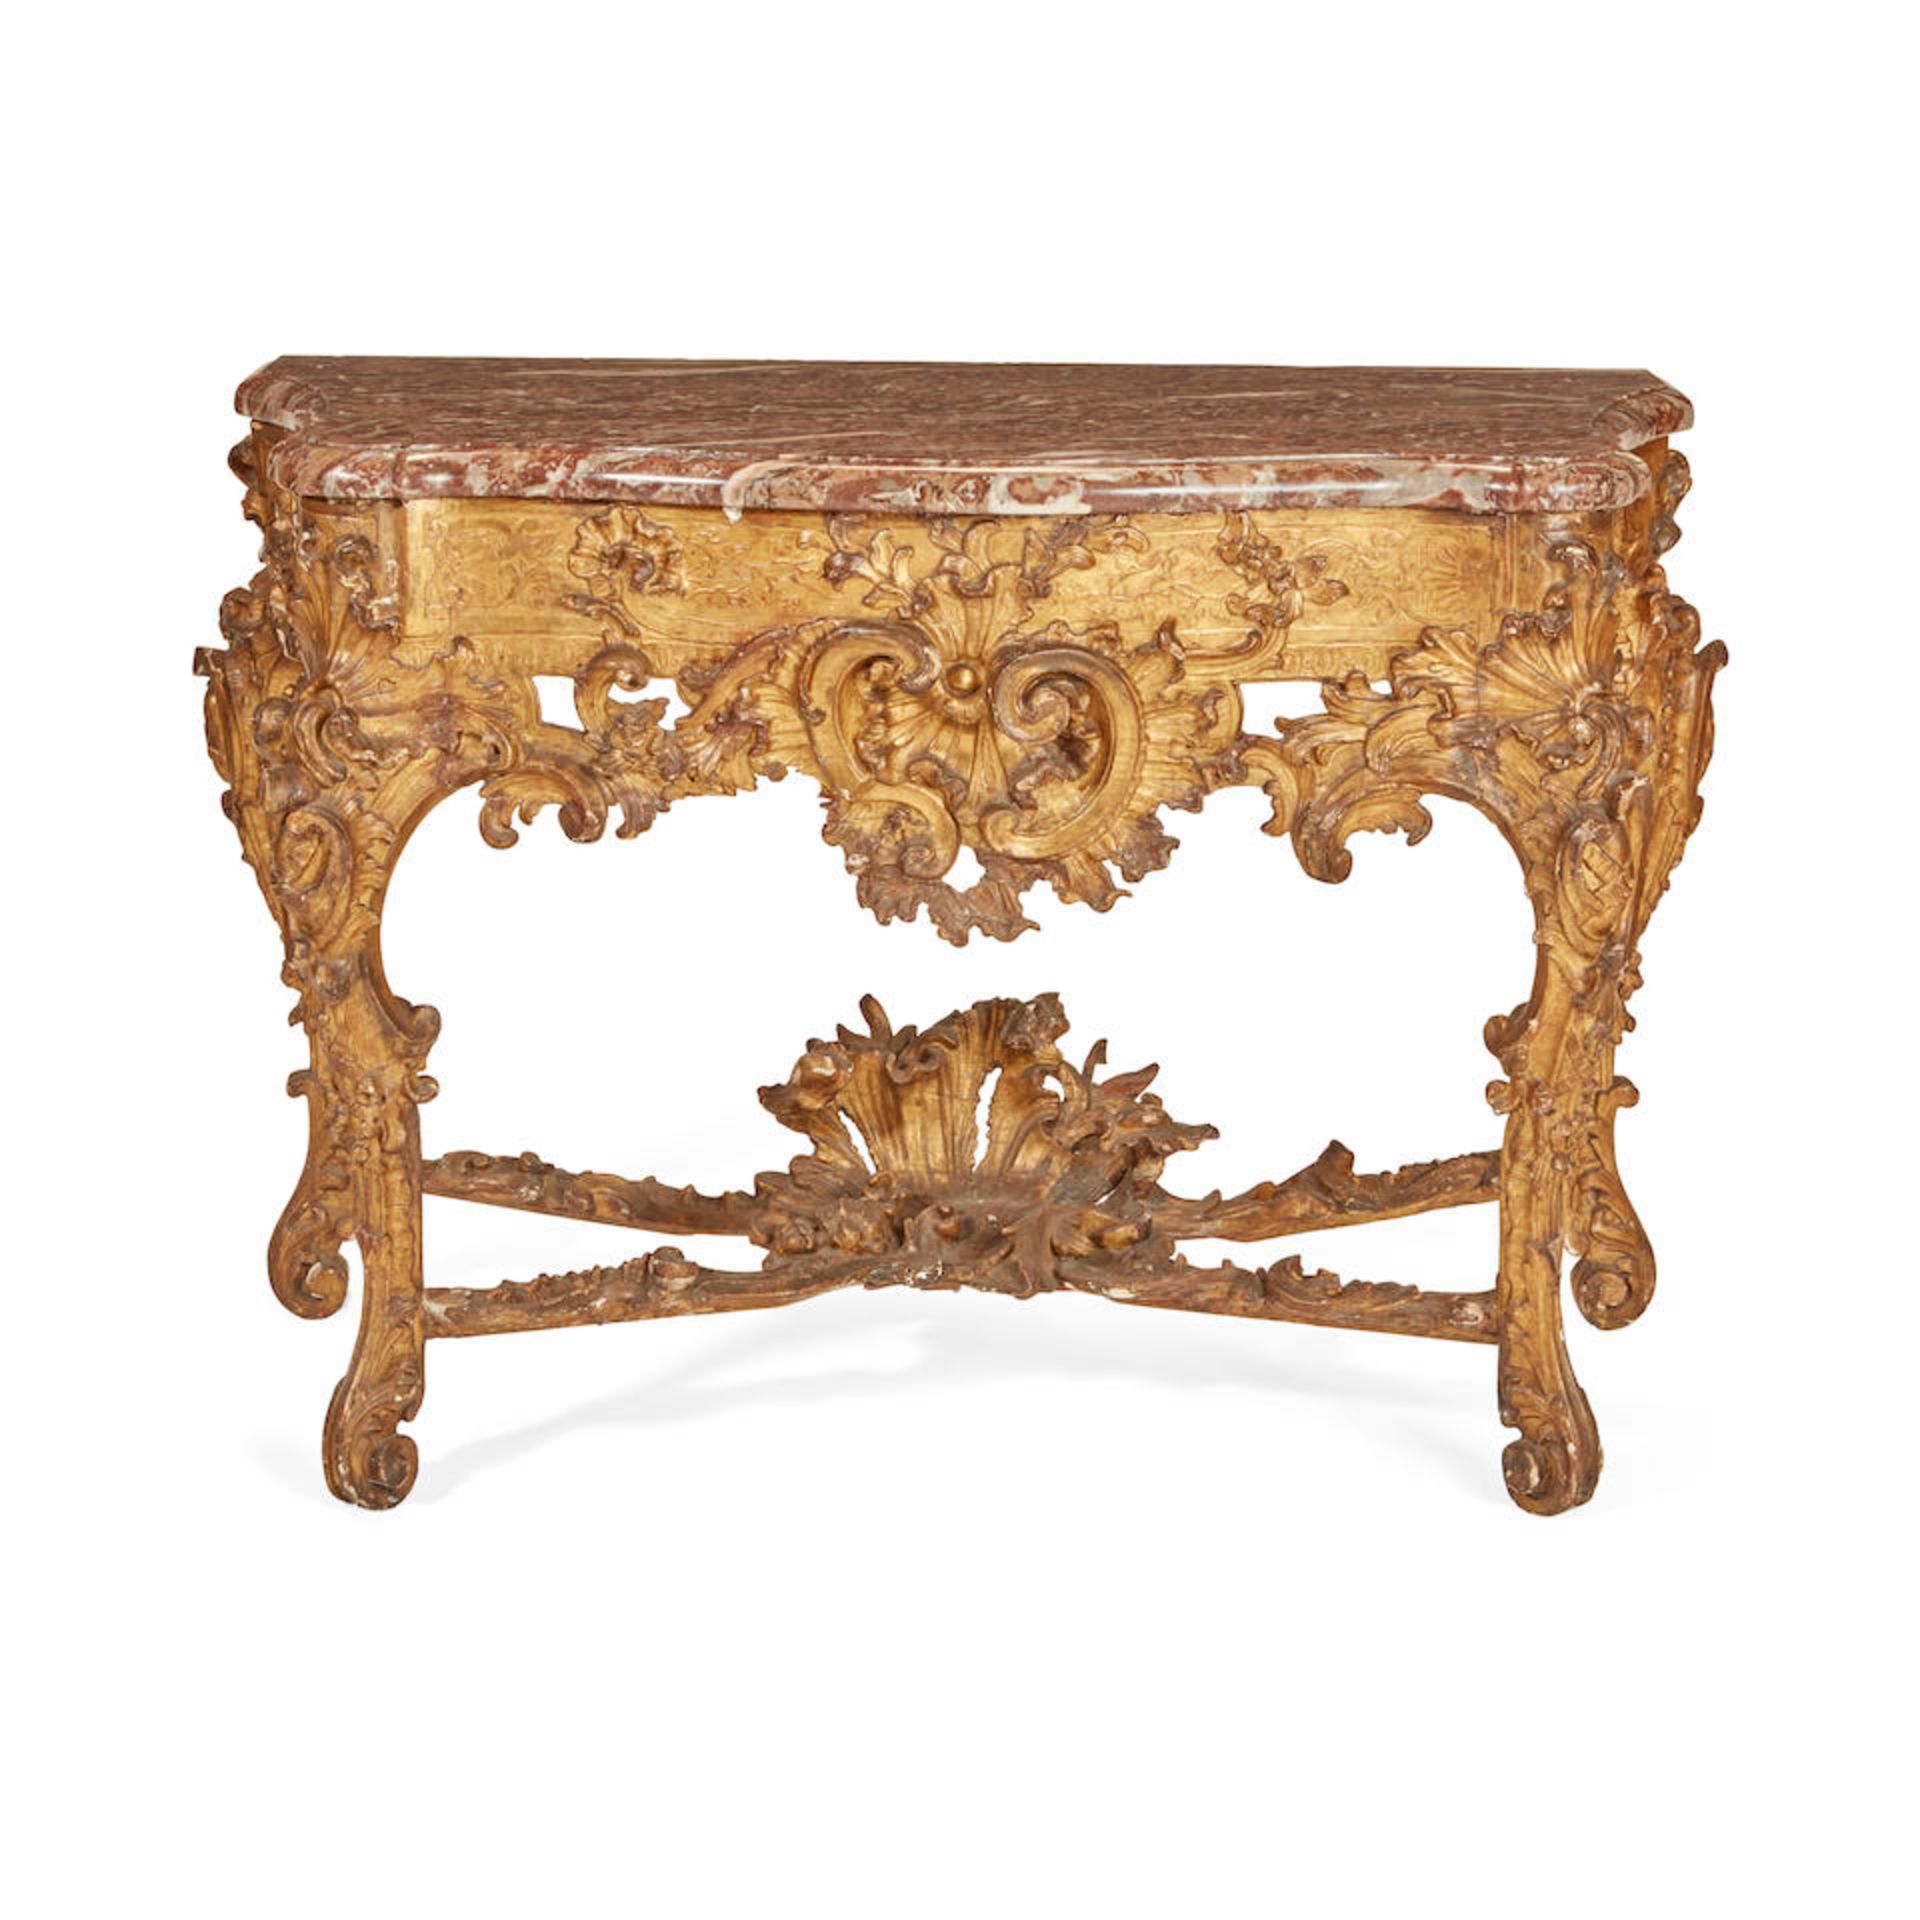 A GERMAN ROCOCO MARBLE TOP CARVED GILTWOOD CONSOLE TABLEMid-18th century - Bild 2 aus 2